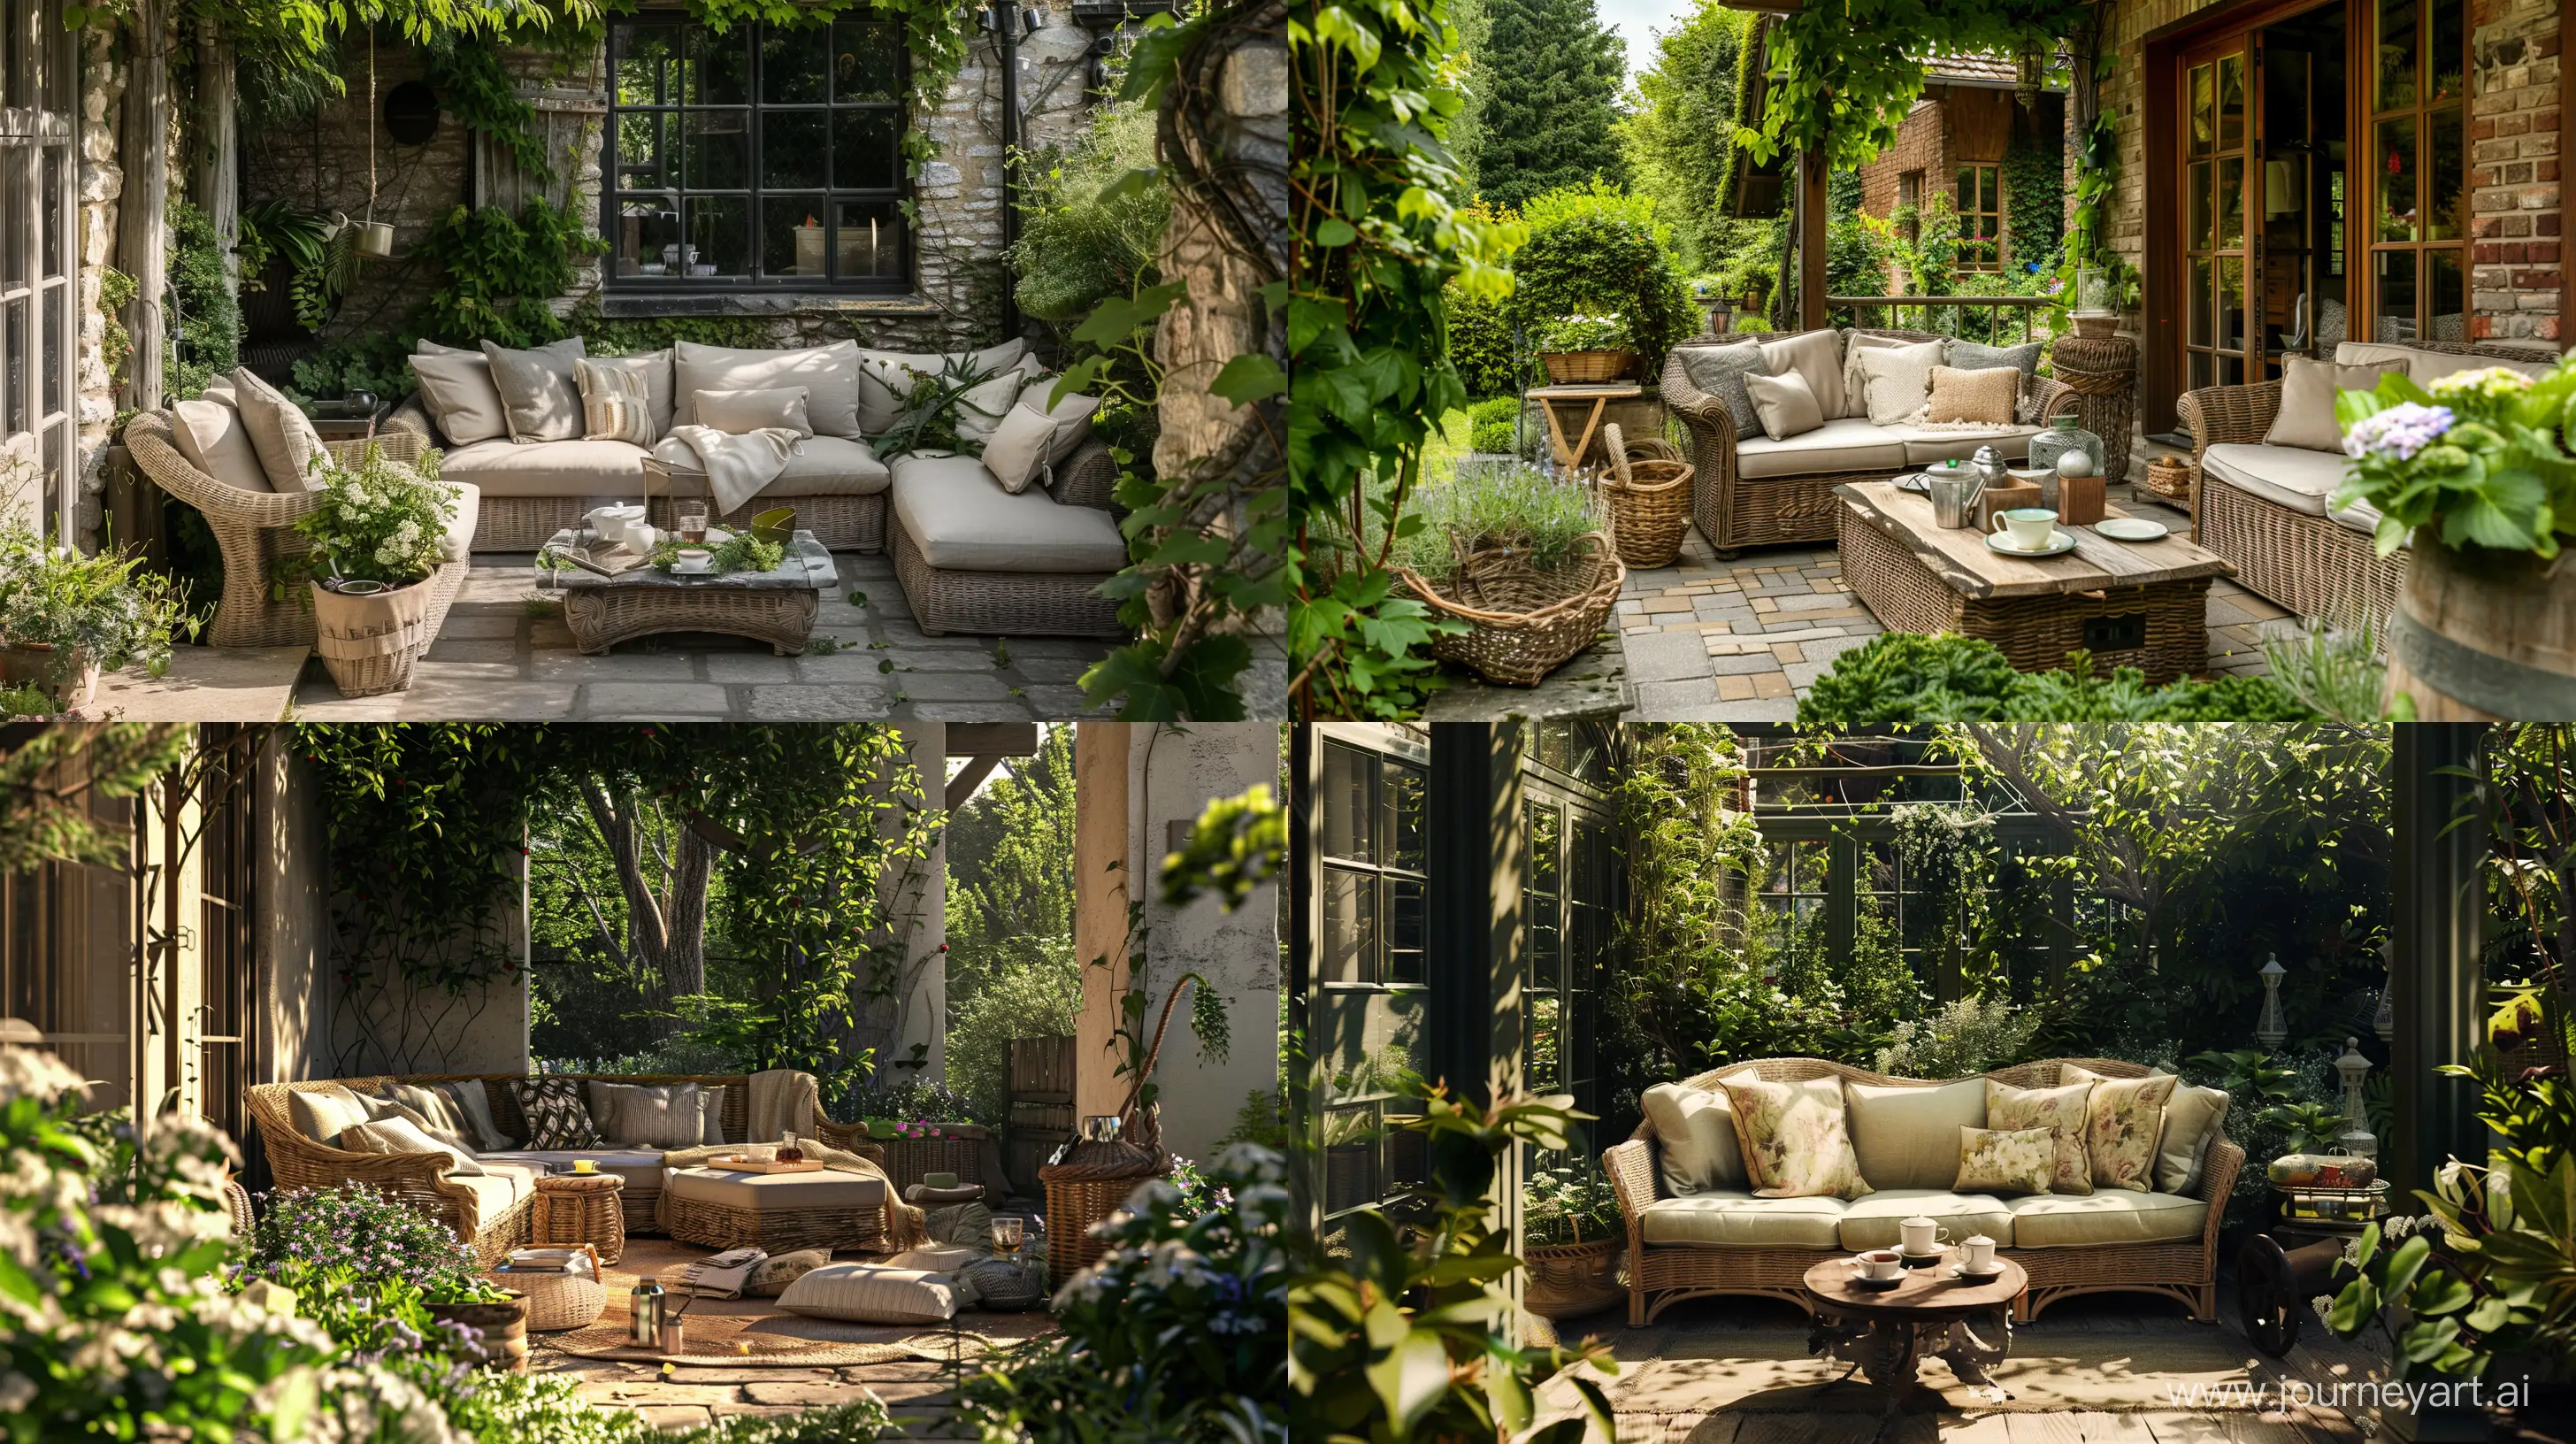 Escape to a tranquil garden lounge adorned with charming outdoor furniture, nestled amidst the picturesque backdrop of a countryside house patio. Imagine sinking into a cozy sofa, surrounded by lush greenery and the soothing sounds of nature, while sipping tea on a quaint country cottage-style patio. --ar 16:9